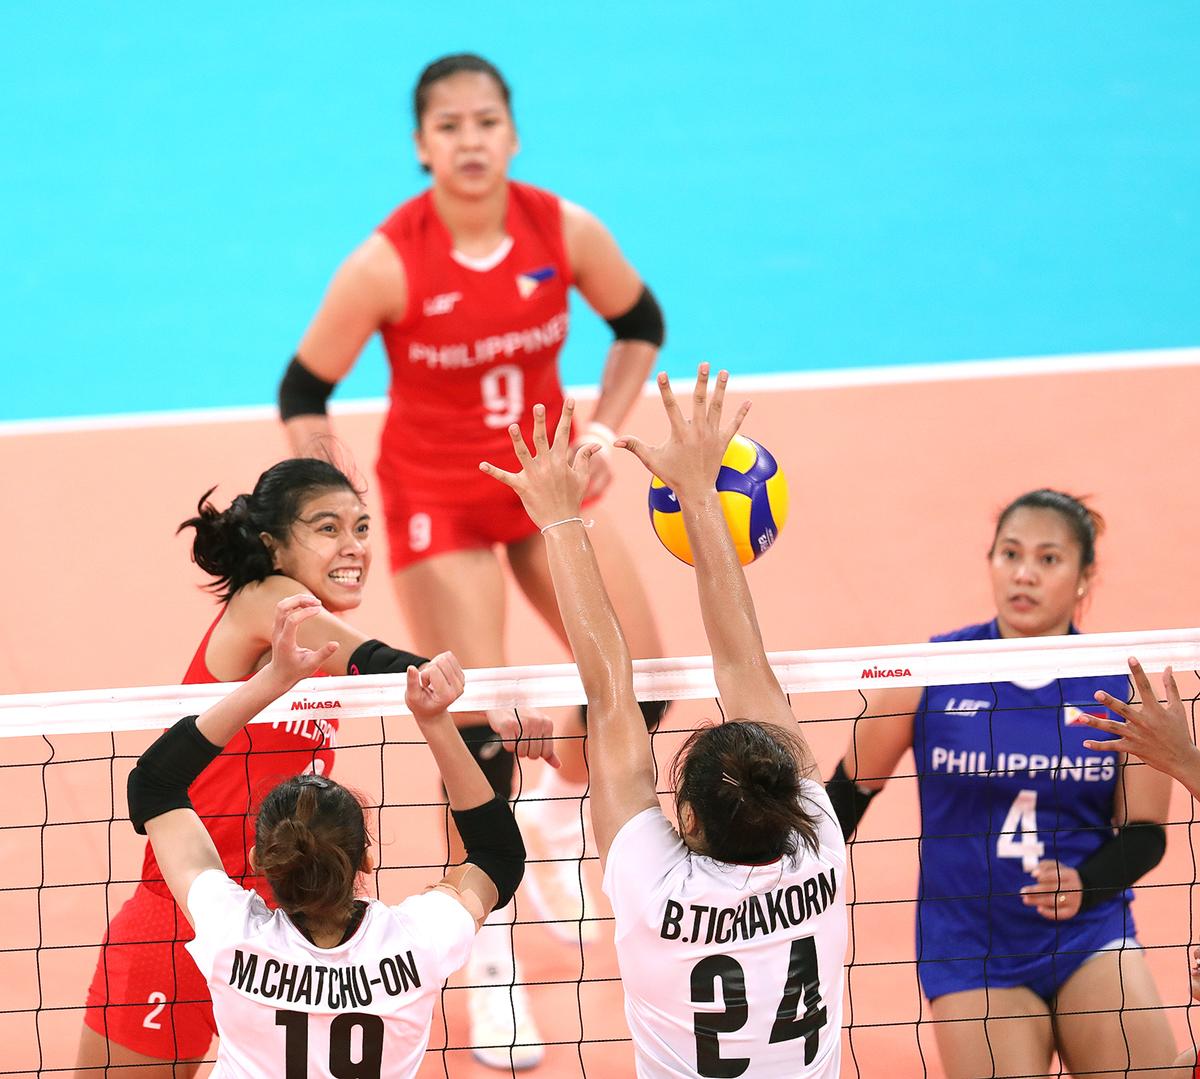 Phl Womens Volleyball Team Misses Podium Bows To Indonesia In 5 Set Heartbreaker Gma News Online